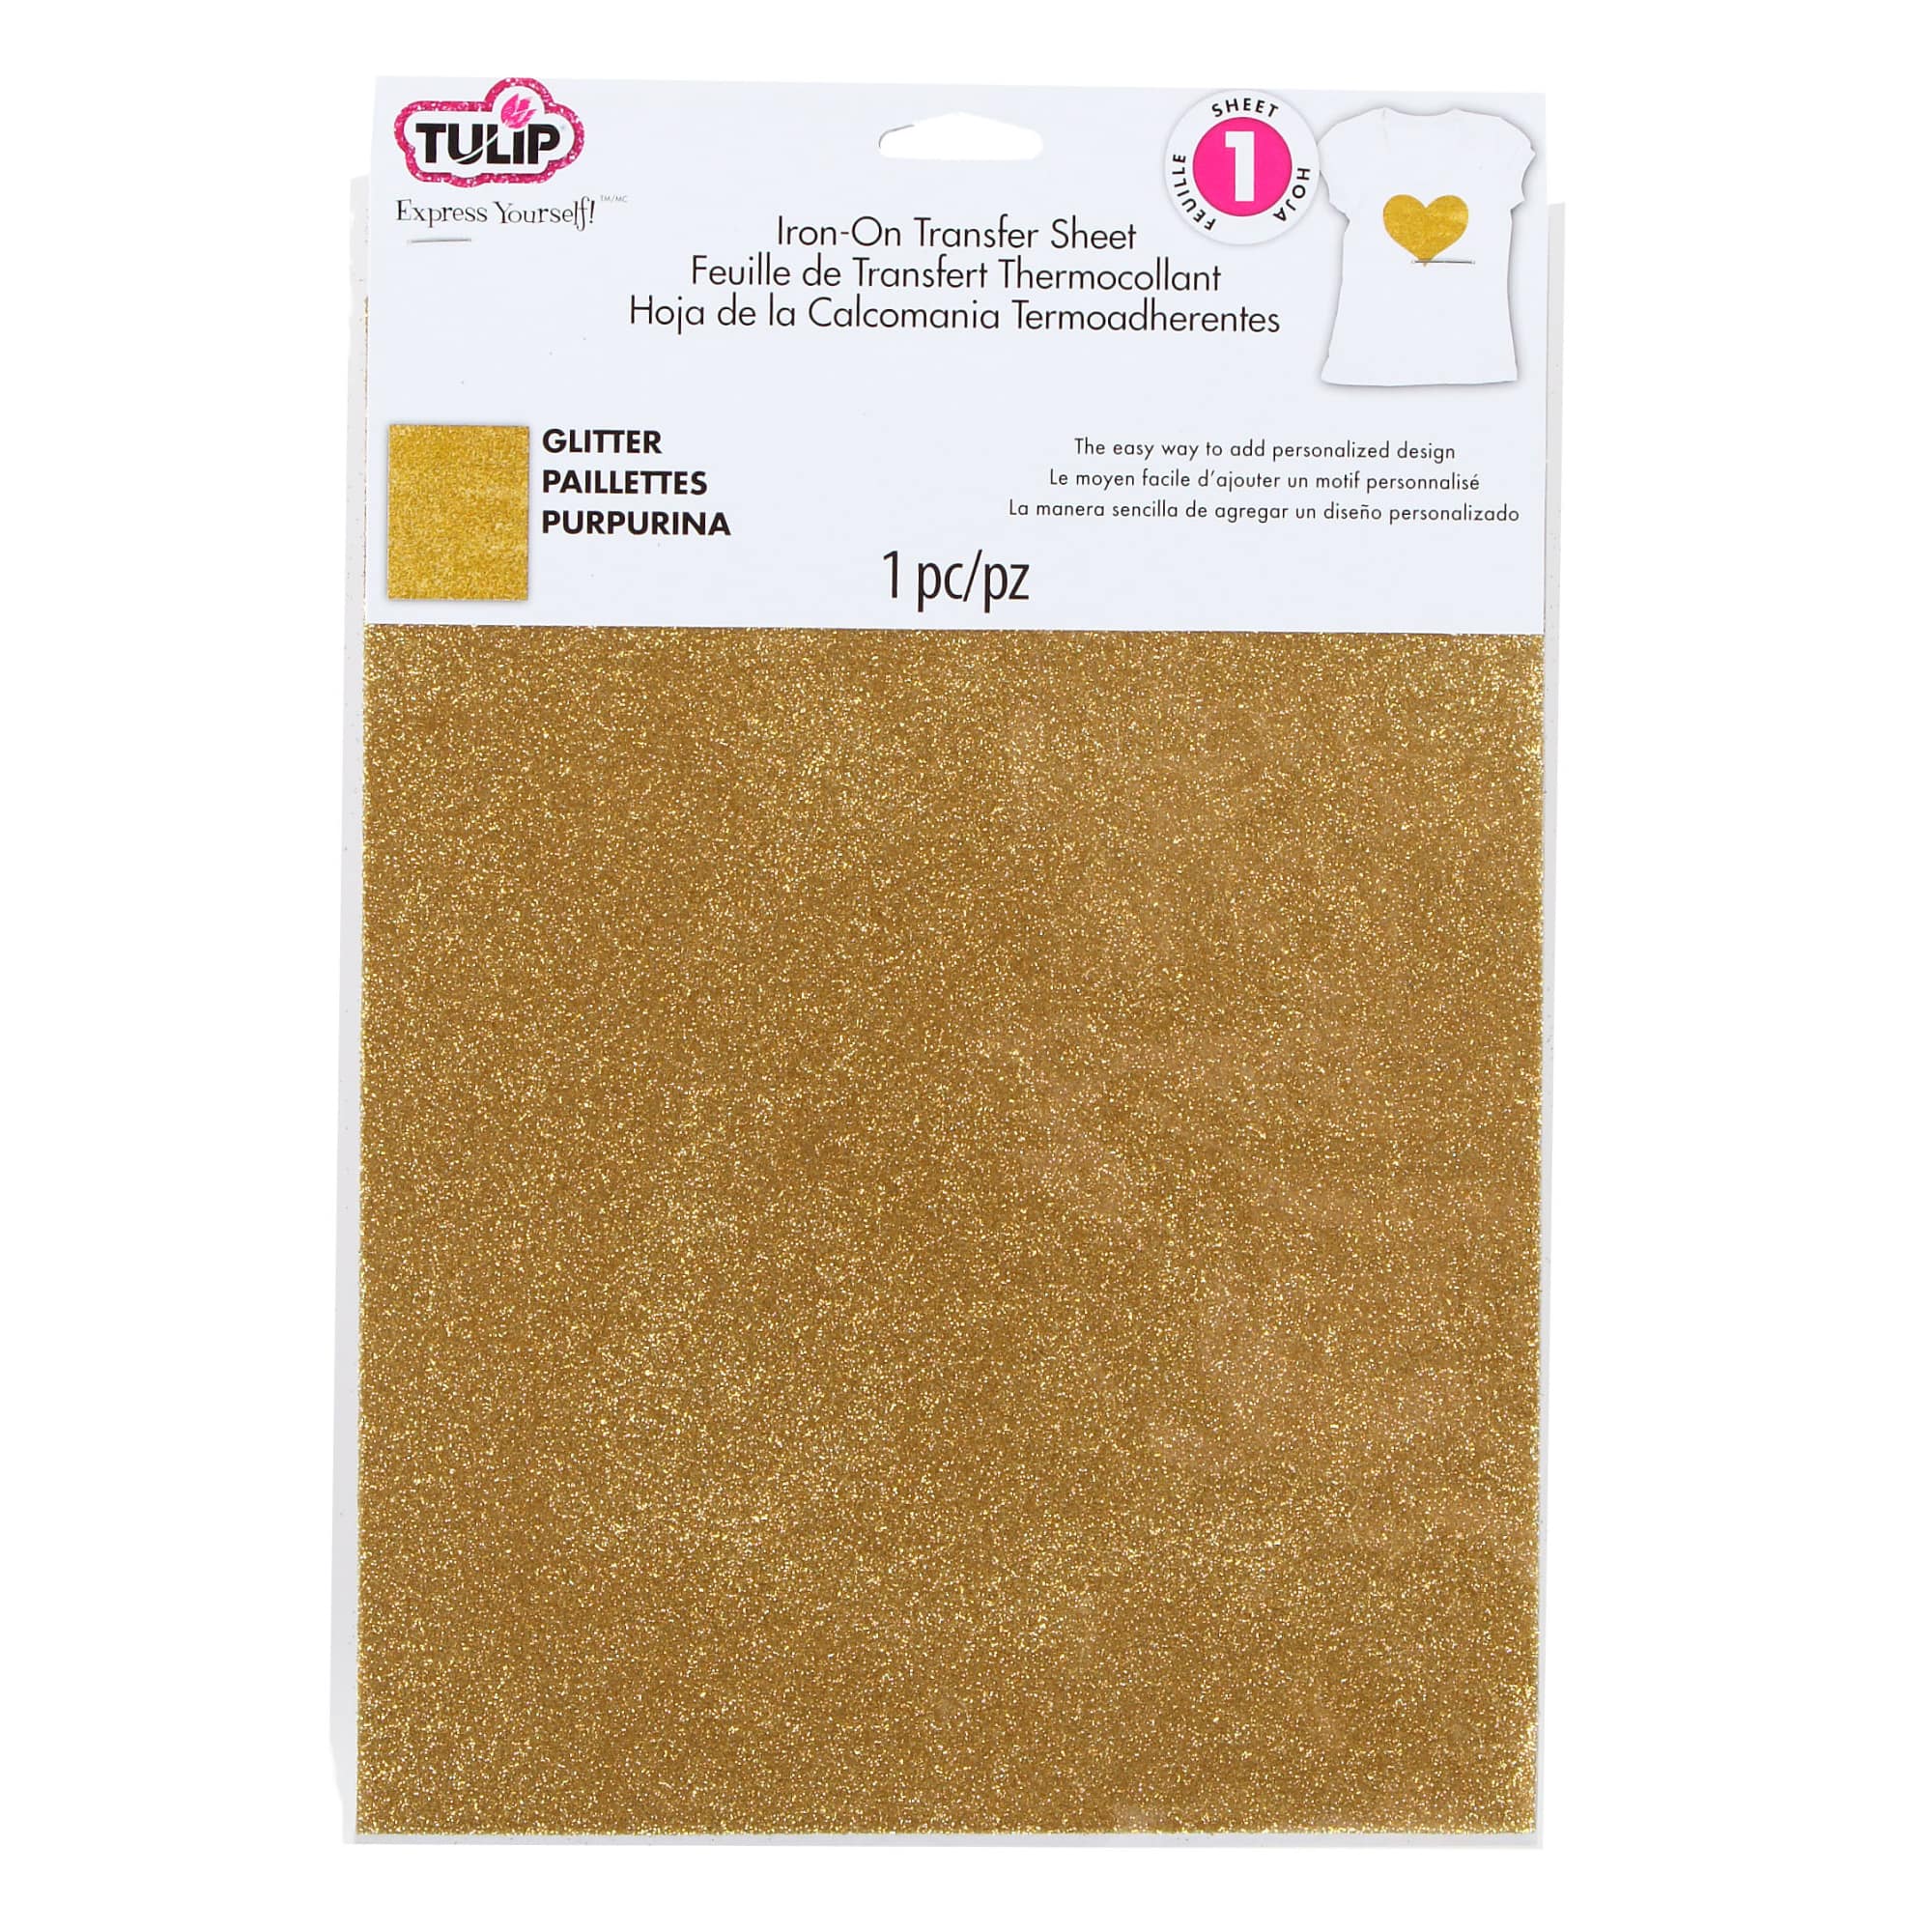 Find the Tulip Express Yourself Iron-On Sheet, Gold Glitter at Michael's